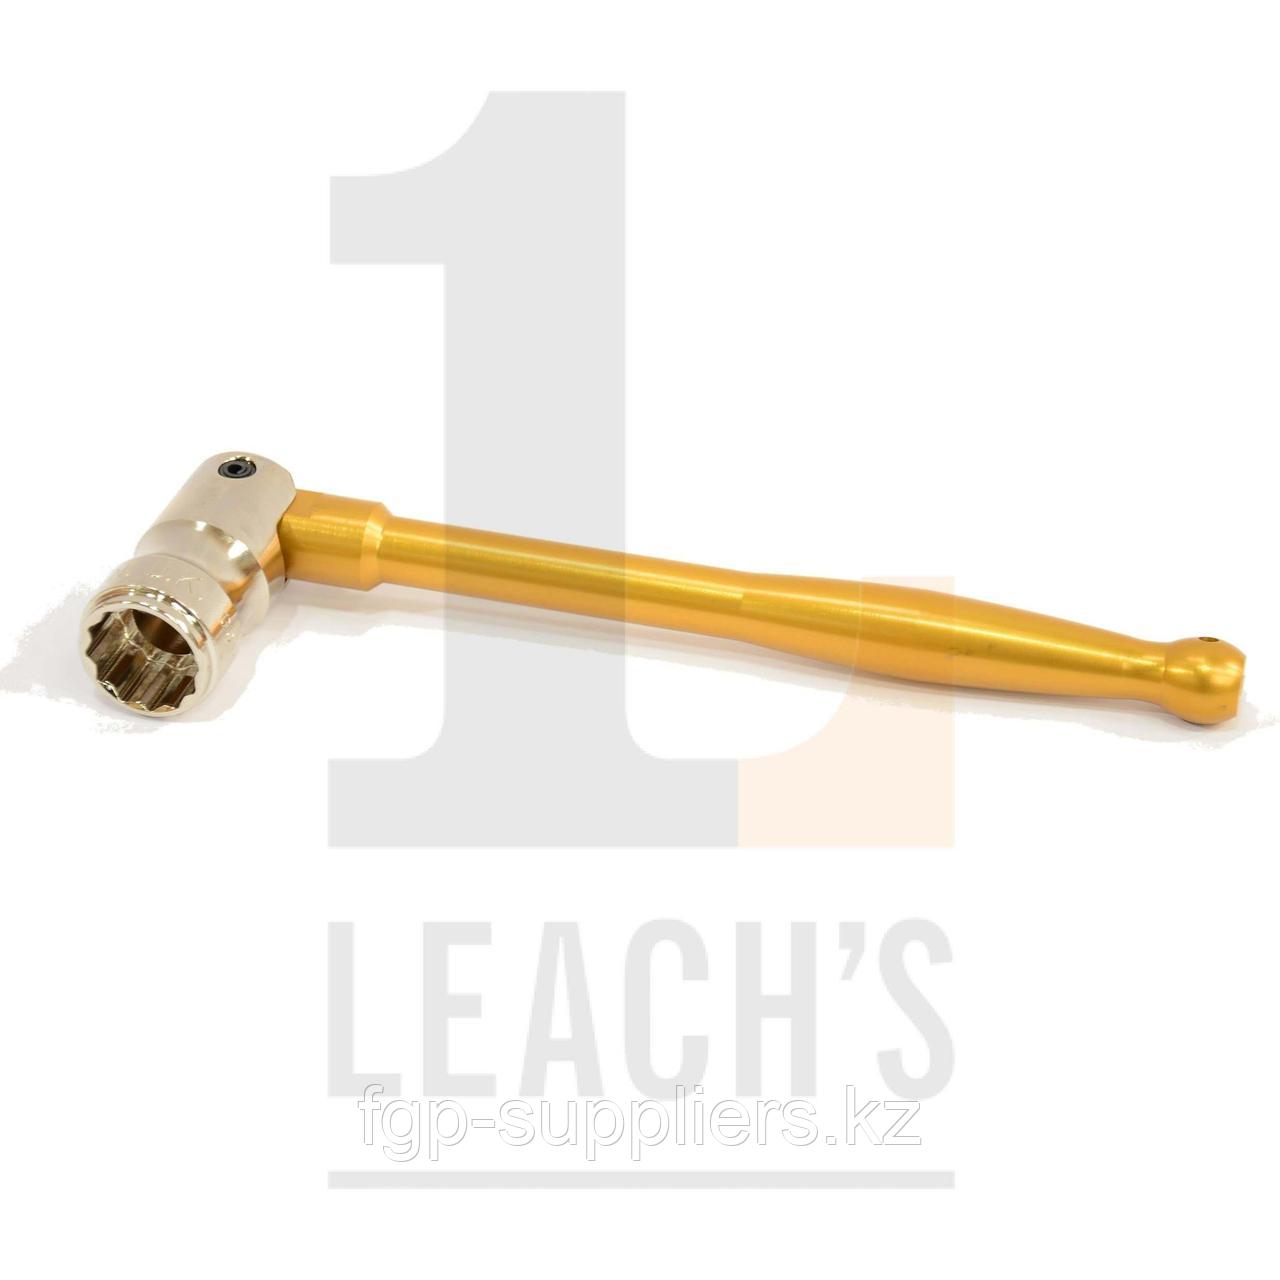 Coloured Whippet Spanner - 7/16" Leach's IMN Bi-Hex Steel Pinched Box with A.Alloy Dawn Gold Handle / Цветной торцовый гаечный ключ 7/16 Leach's - фото 1 - id-p65537656